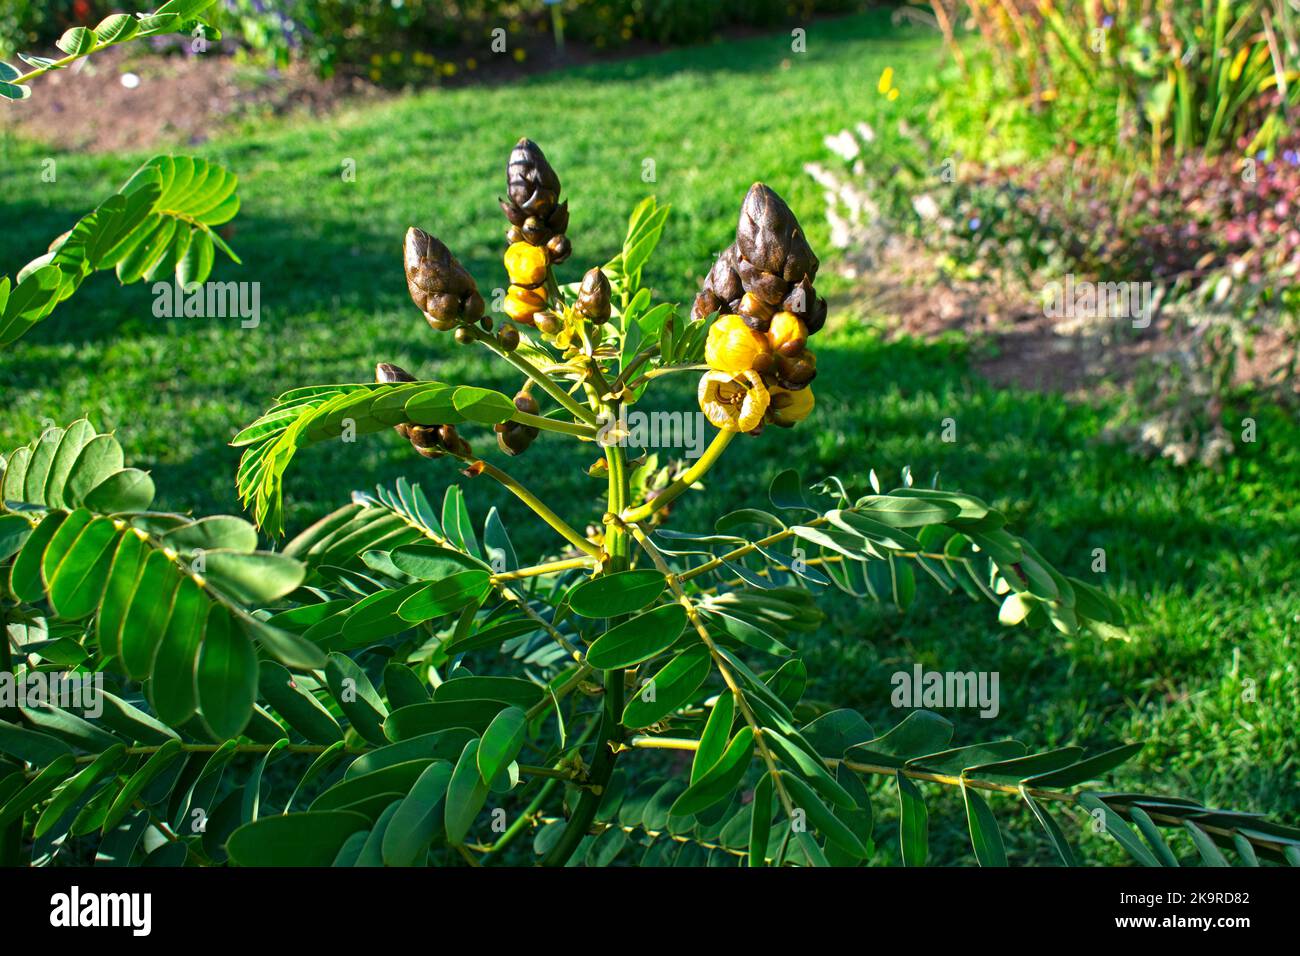 African Senna, also known as popcorn plant, with yellow flowers and dark brown buds, on a blurred green grass background -01 Stock Photo